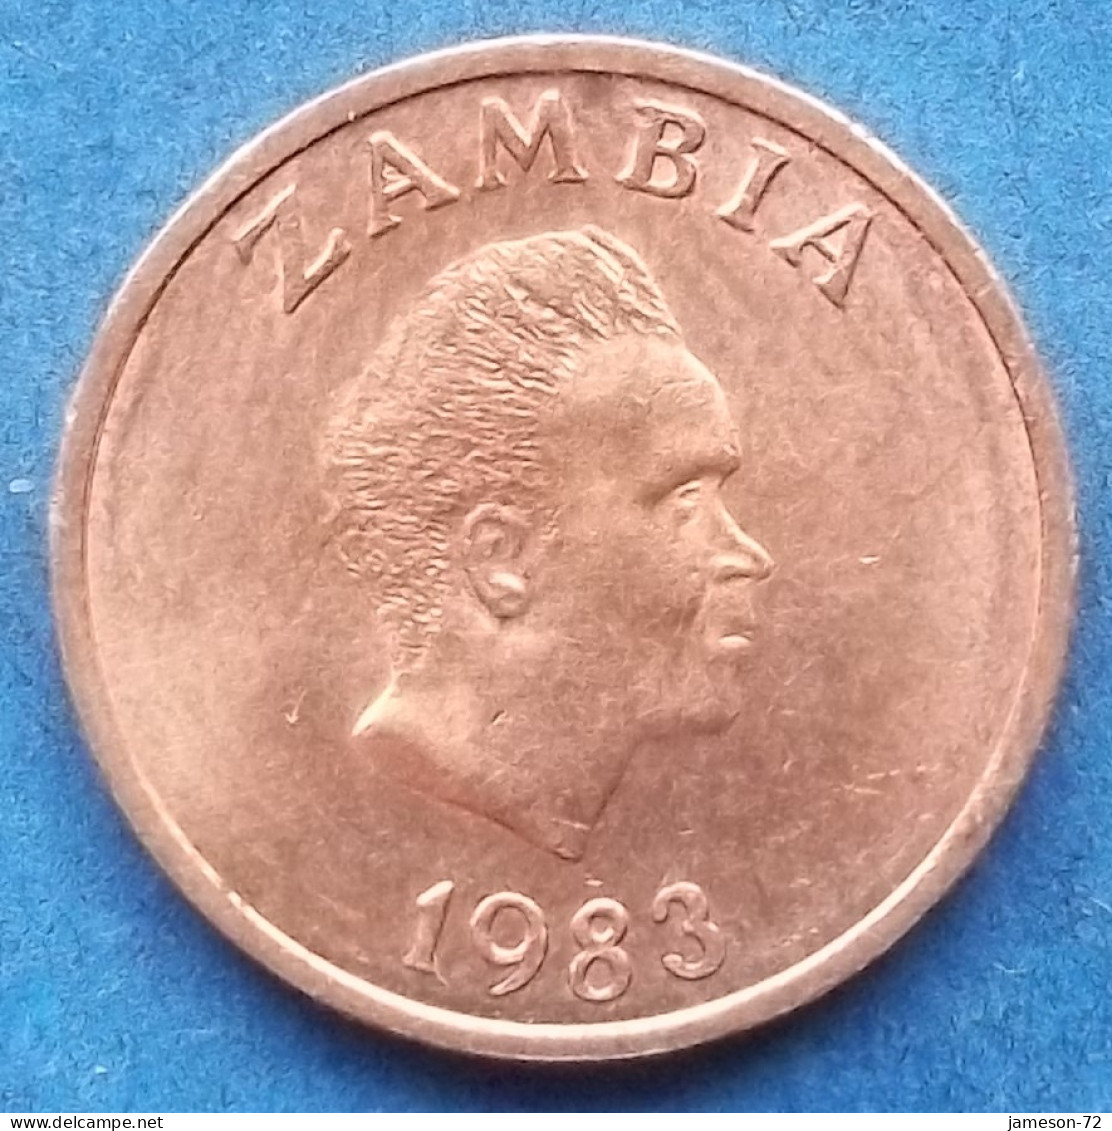 ZAMBIA - 1 Ngwee 1983 "Aardvark" KM# 9a Decimal Coinage (1968-2013) - Edelweiss Coins - Sambia